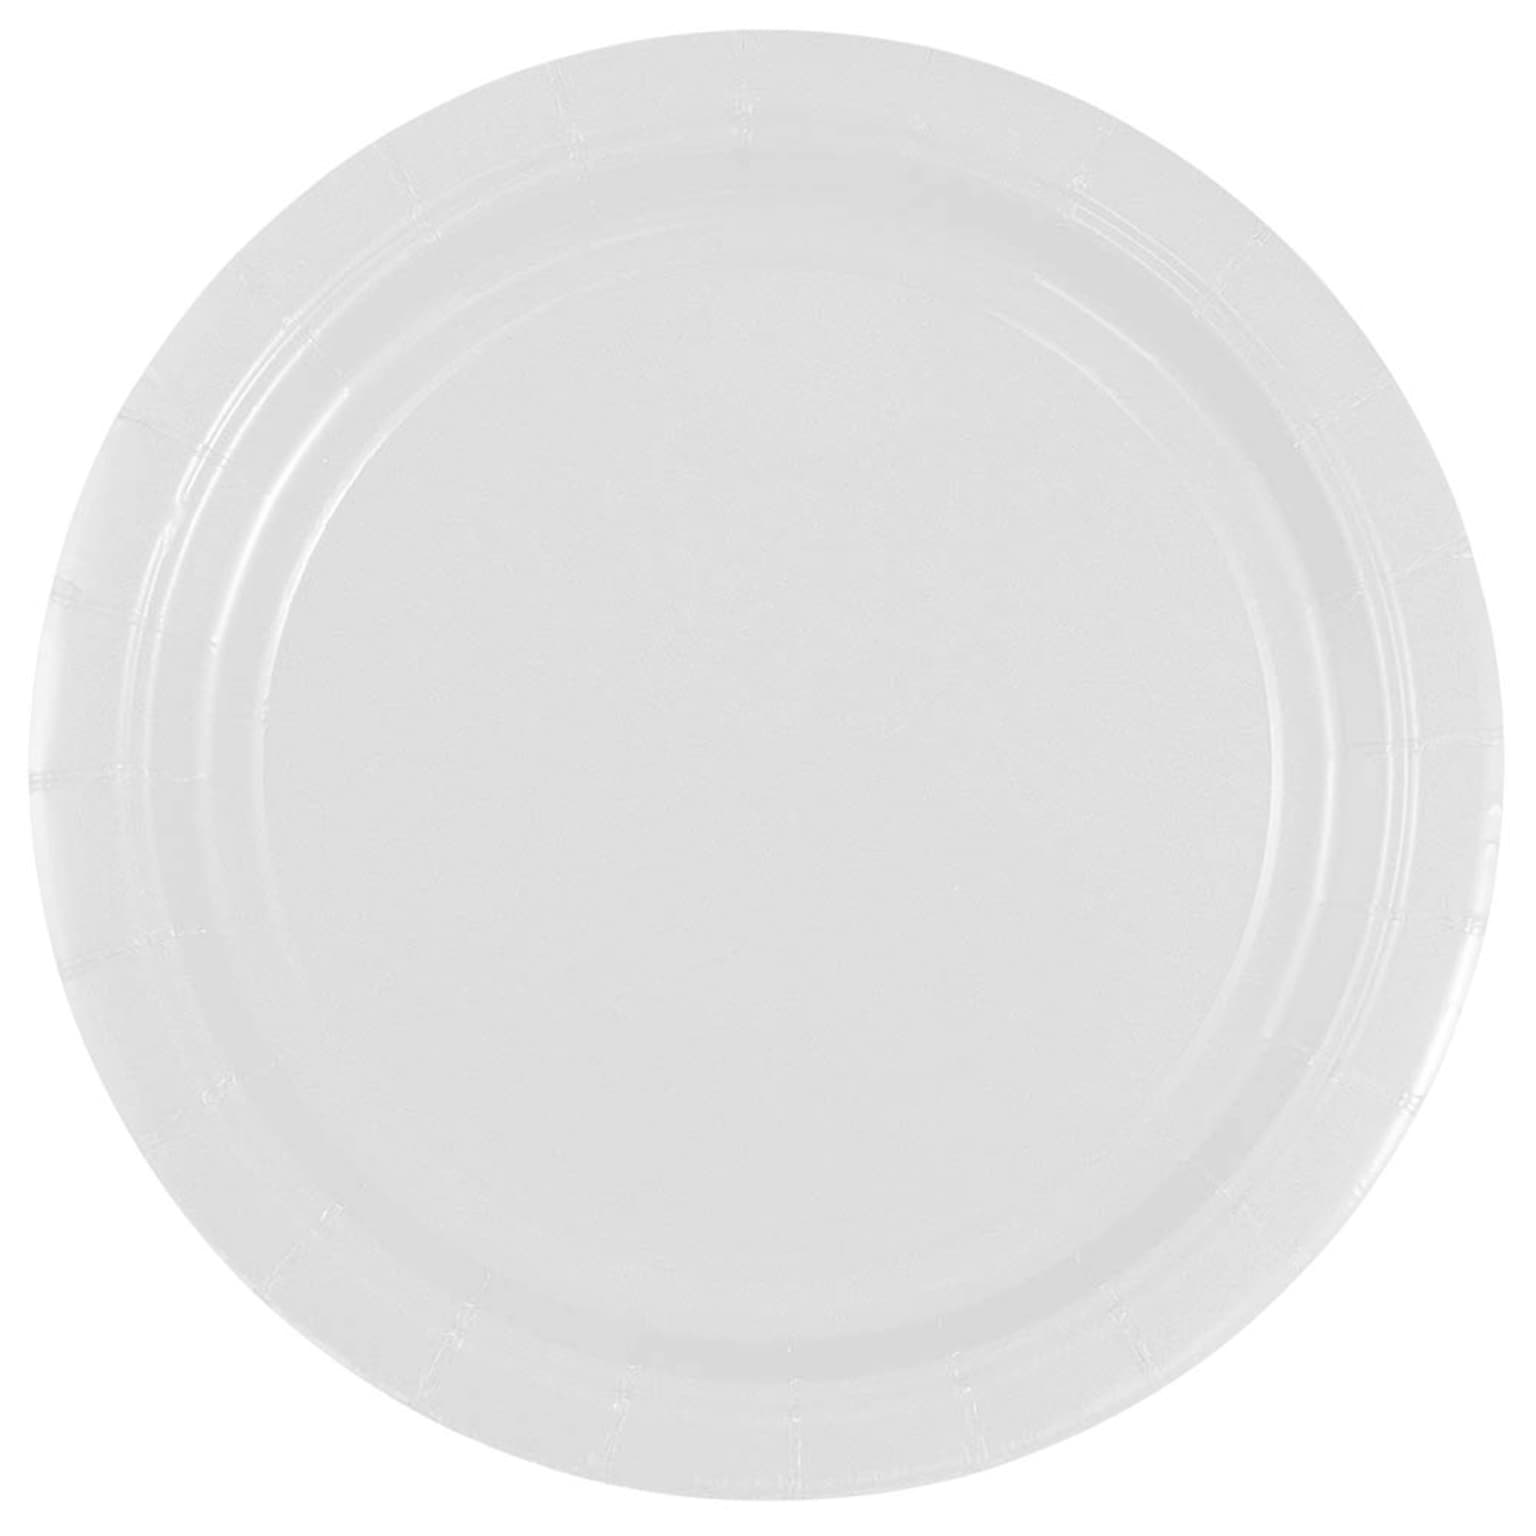 JAM PAPER Round Paper Party Plates, Small, 7 Inch, White, 50/pack